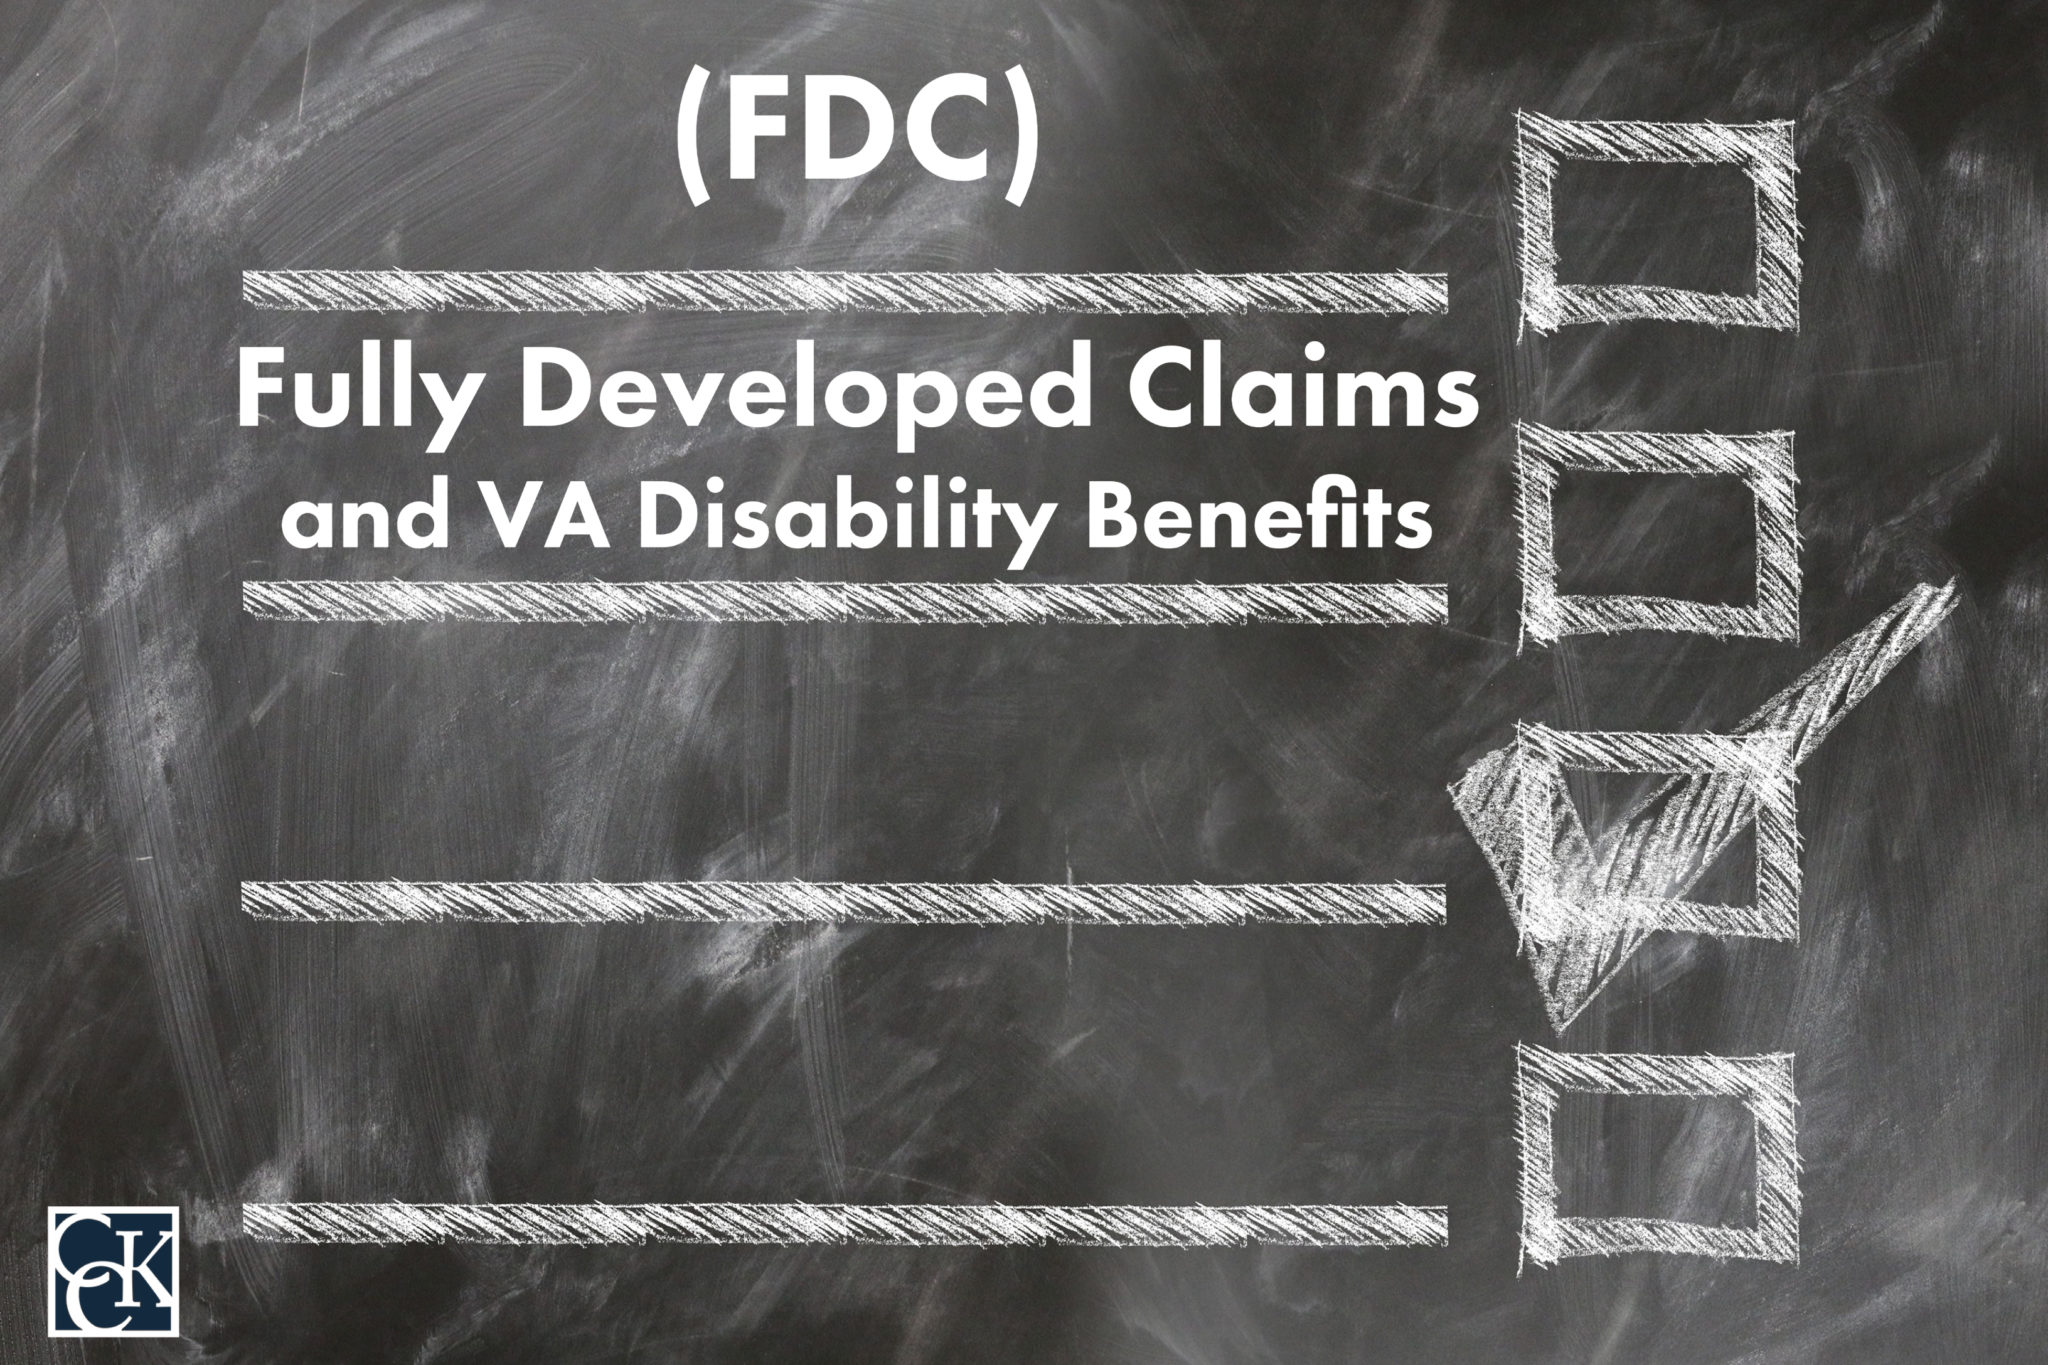 Filing Fully Developed Claims (FDC) for VA Disability Benefits CCK Law